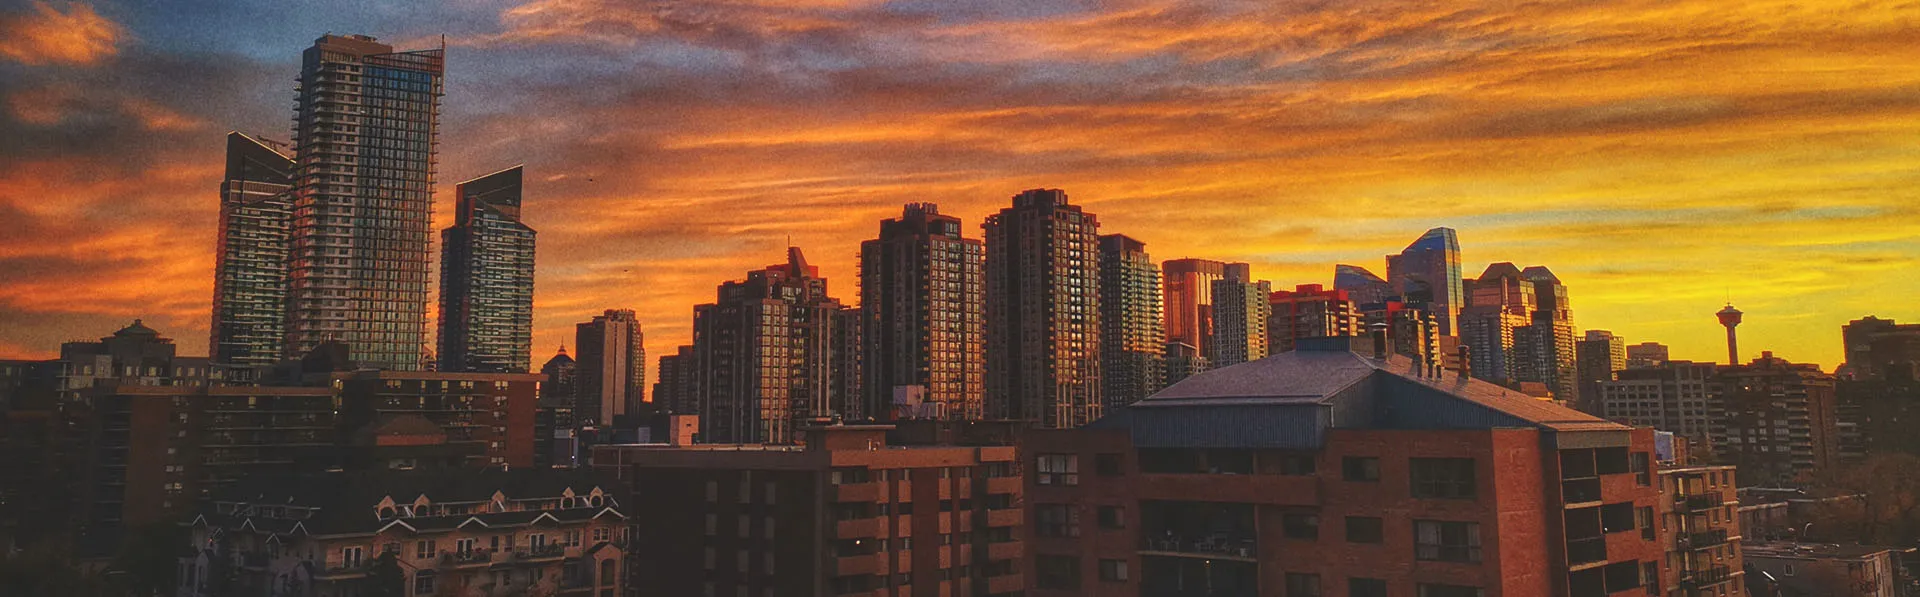 downtown Calgary skyline with a vibrant orange, yellow, blue and purple sunset